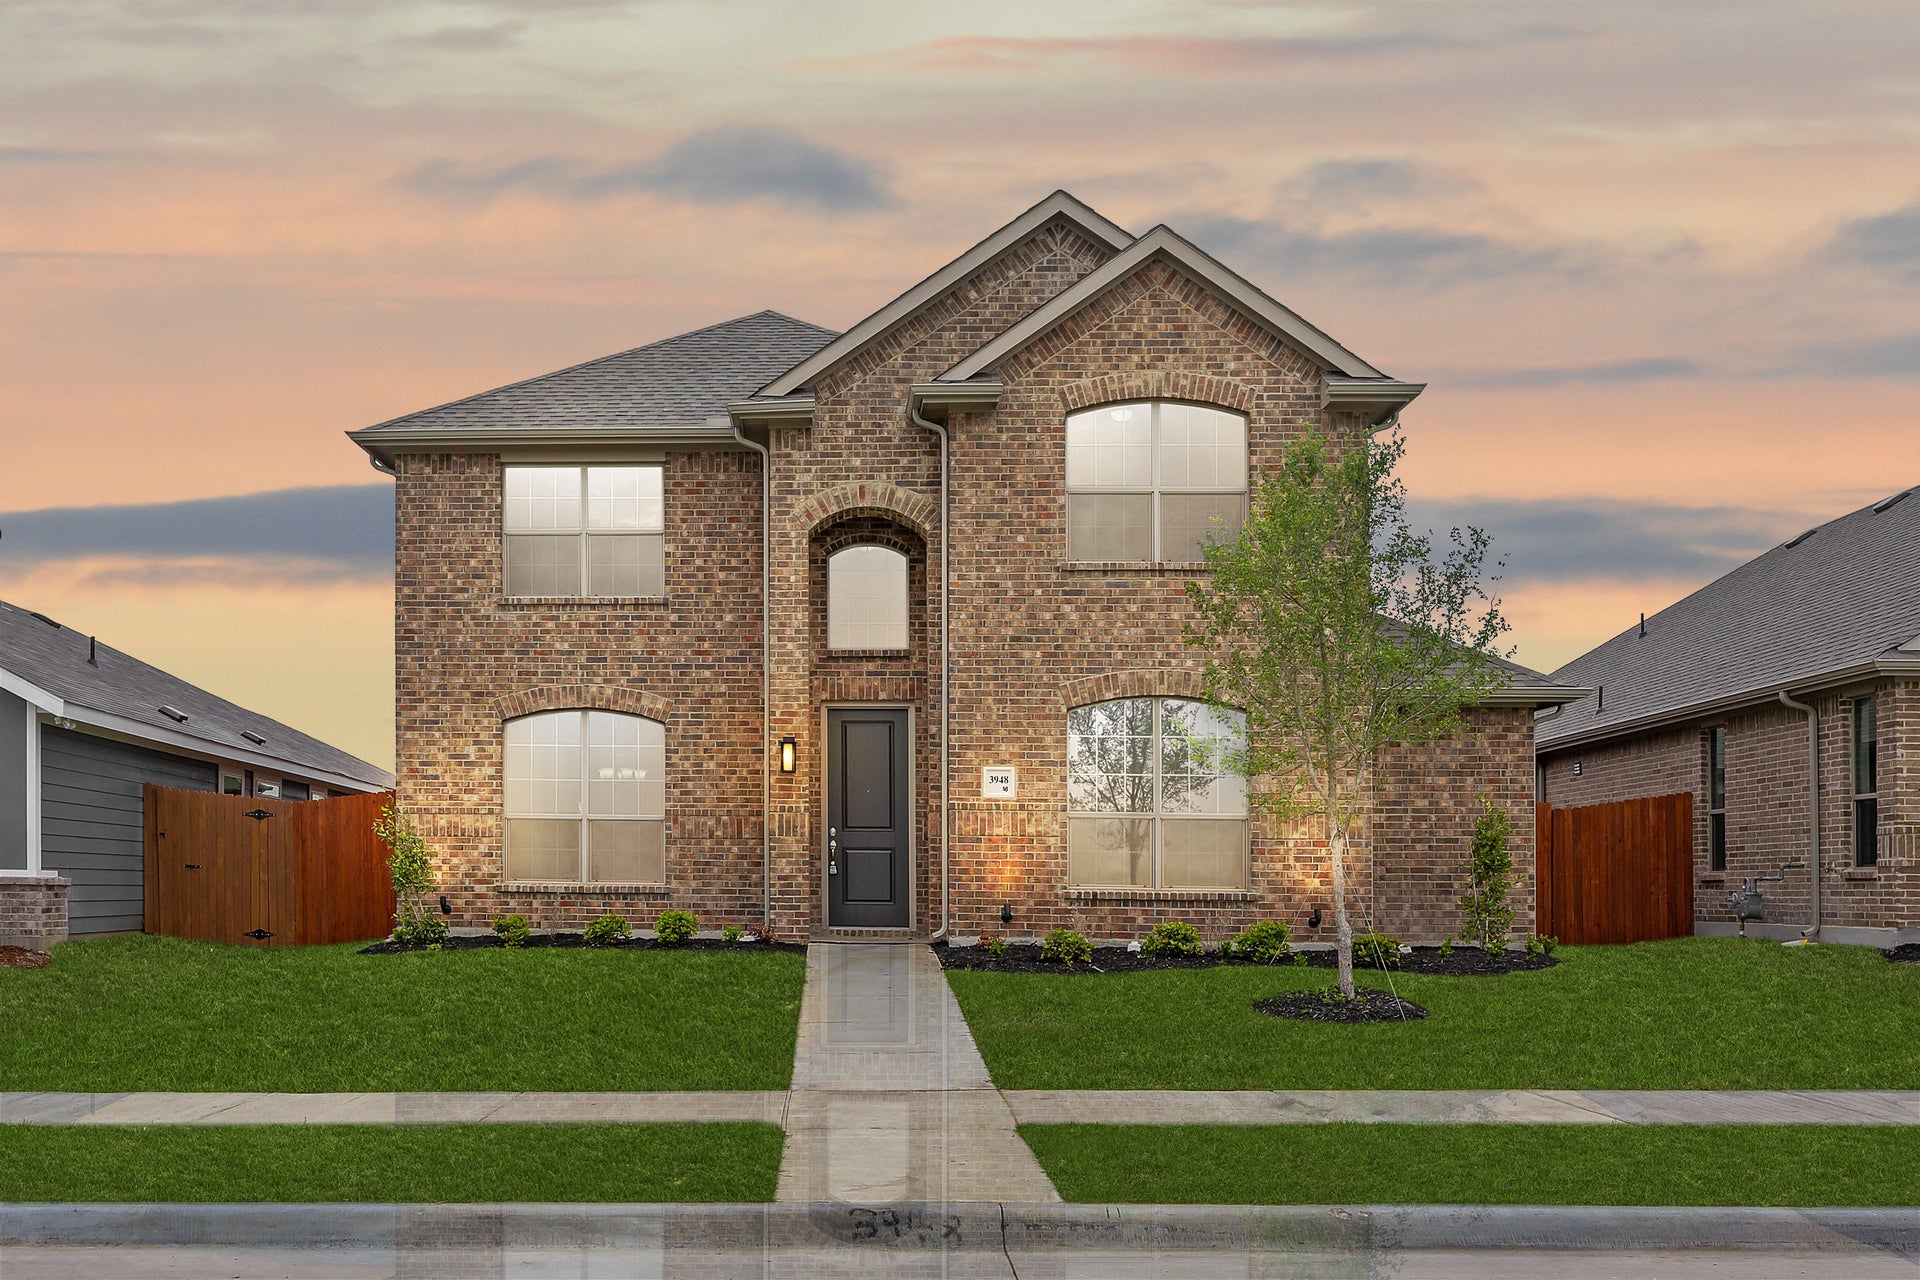 4br New Home in Heartland, TX